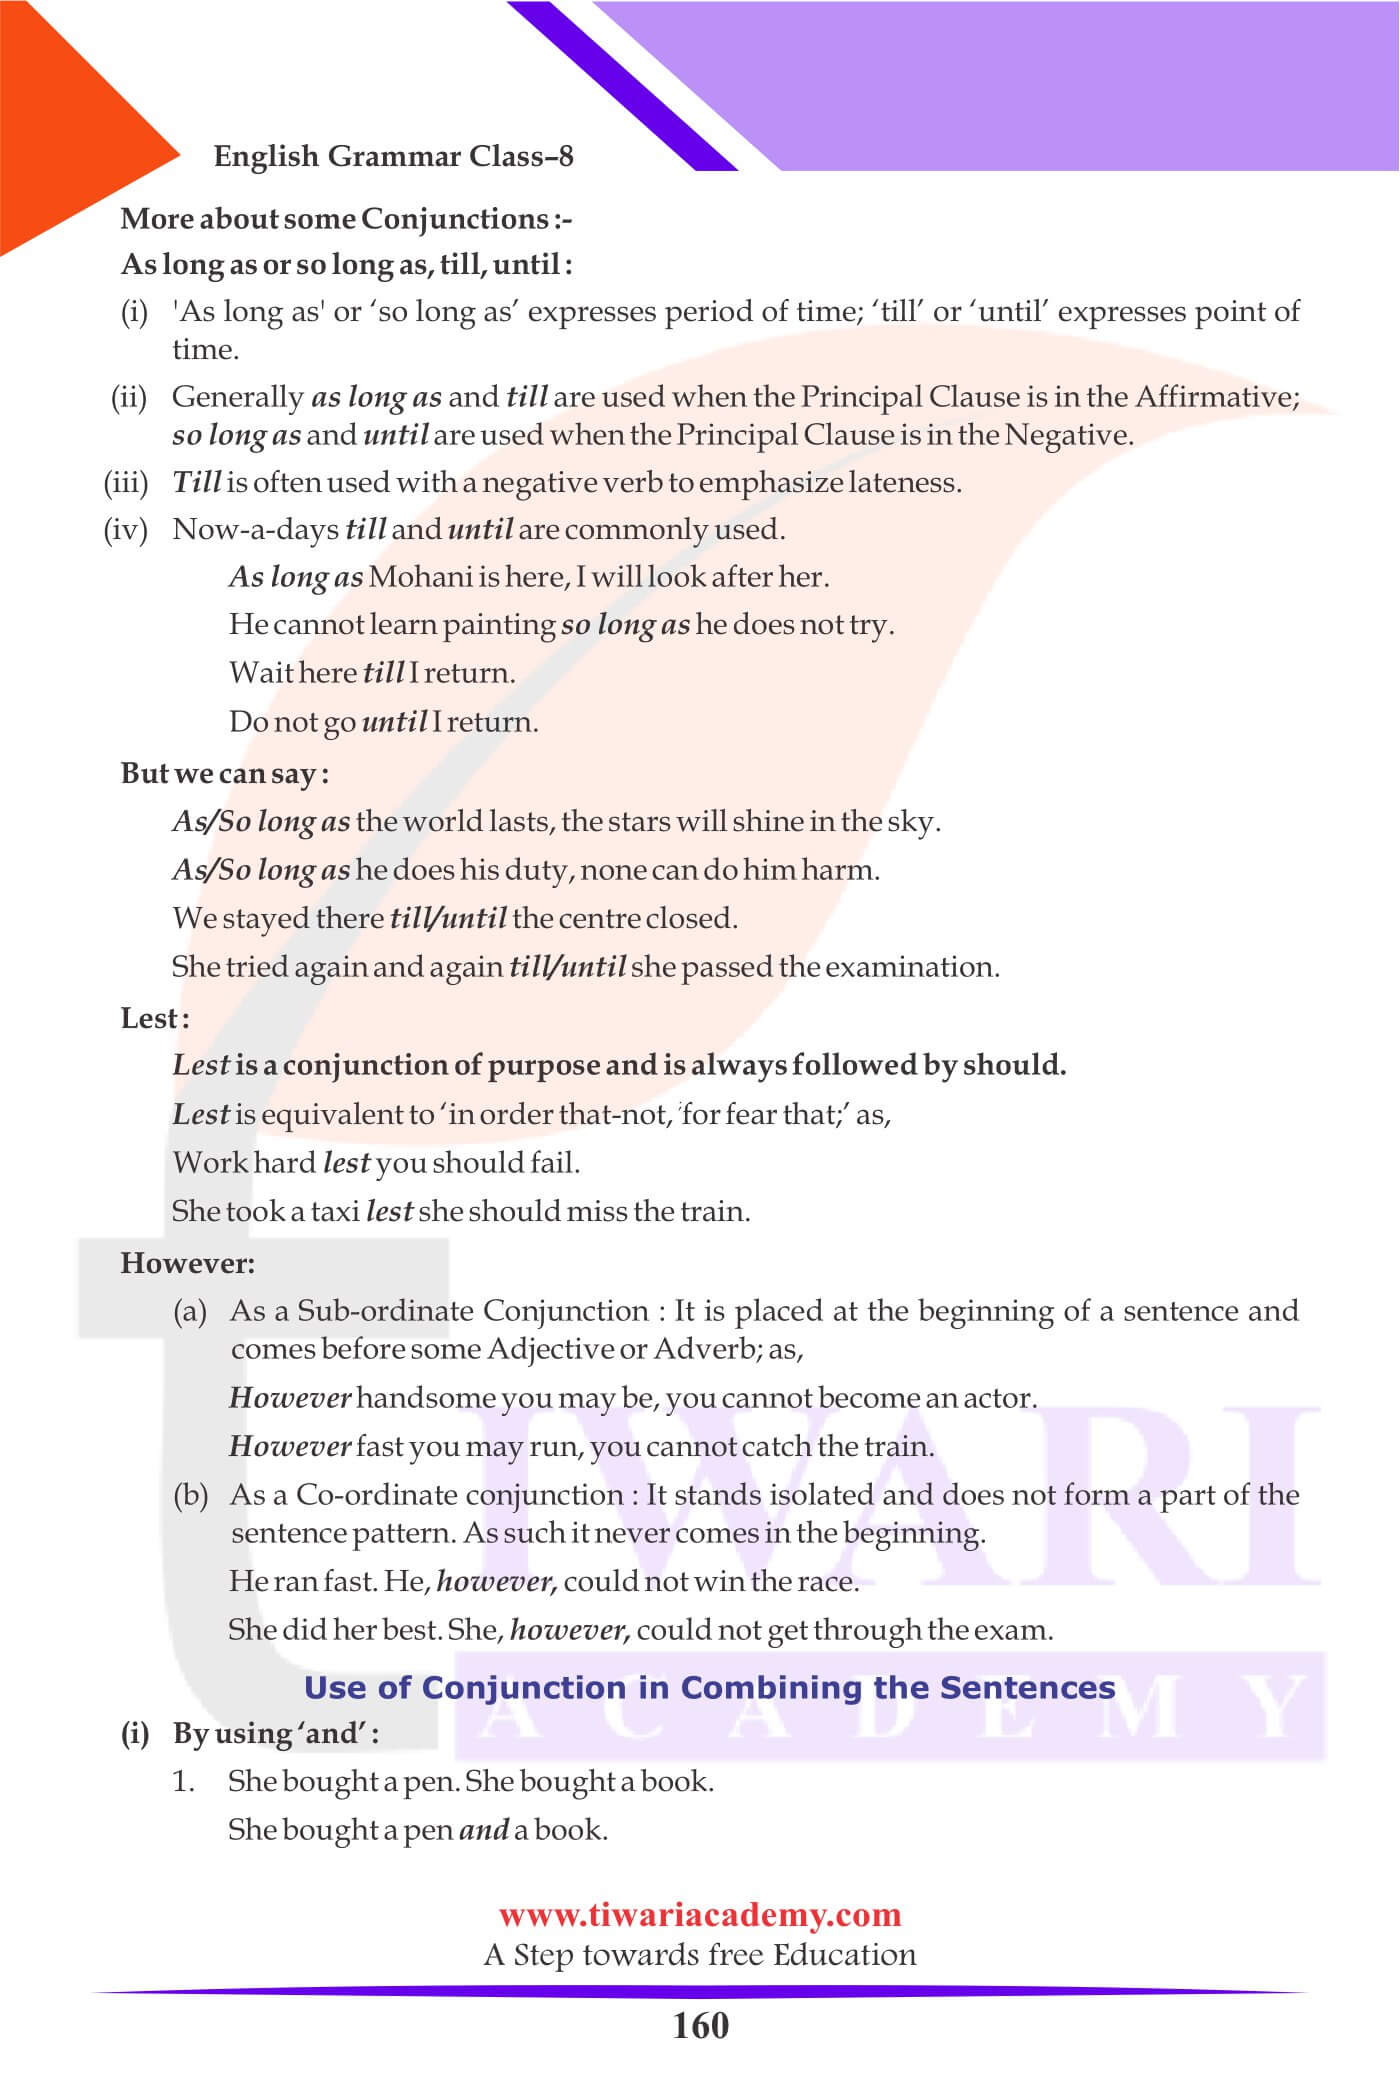 Class 8 English Grammar Conjunctions notes